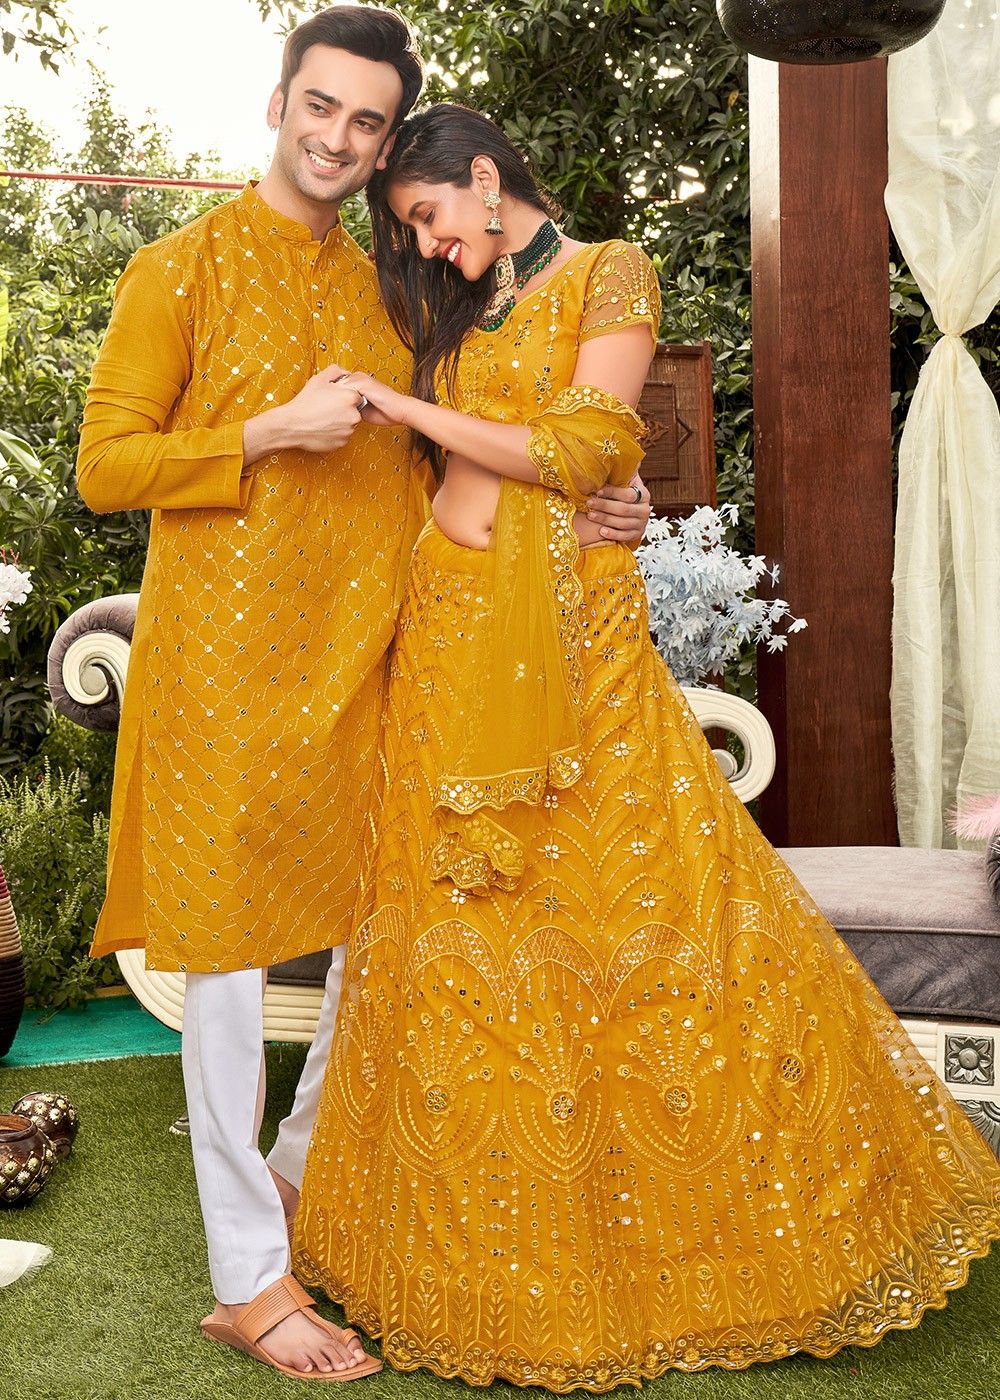 New Trending Matching Couple Dresses In Print Fabric | Wedding matching  outfits, Couple dress, Matching couple outfits